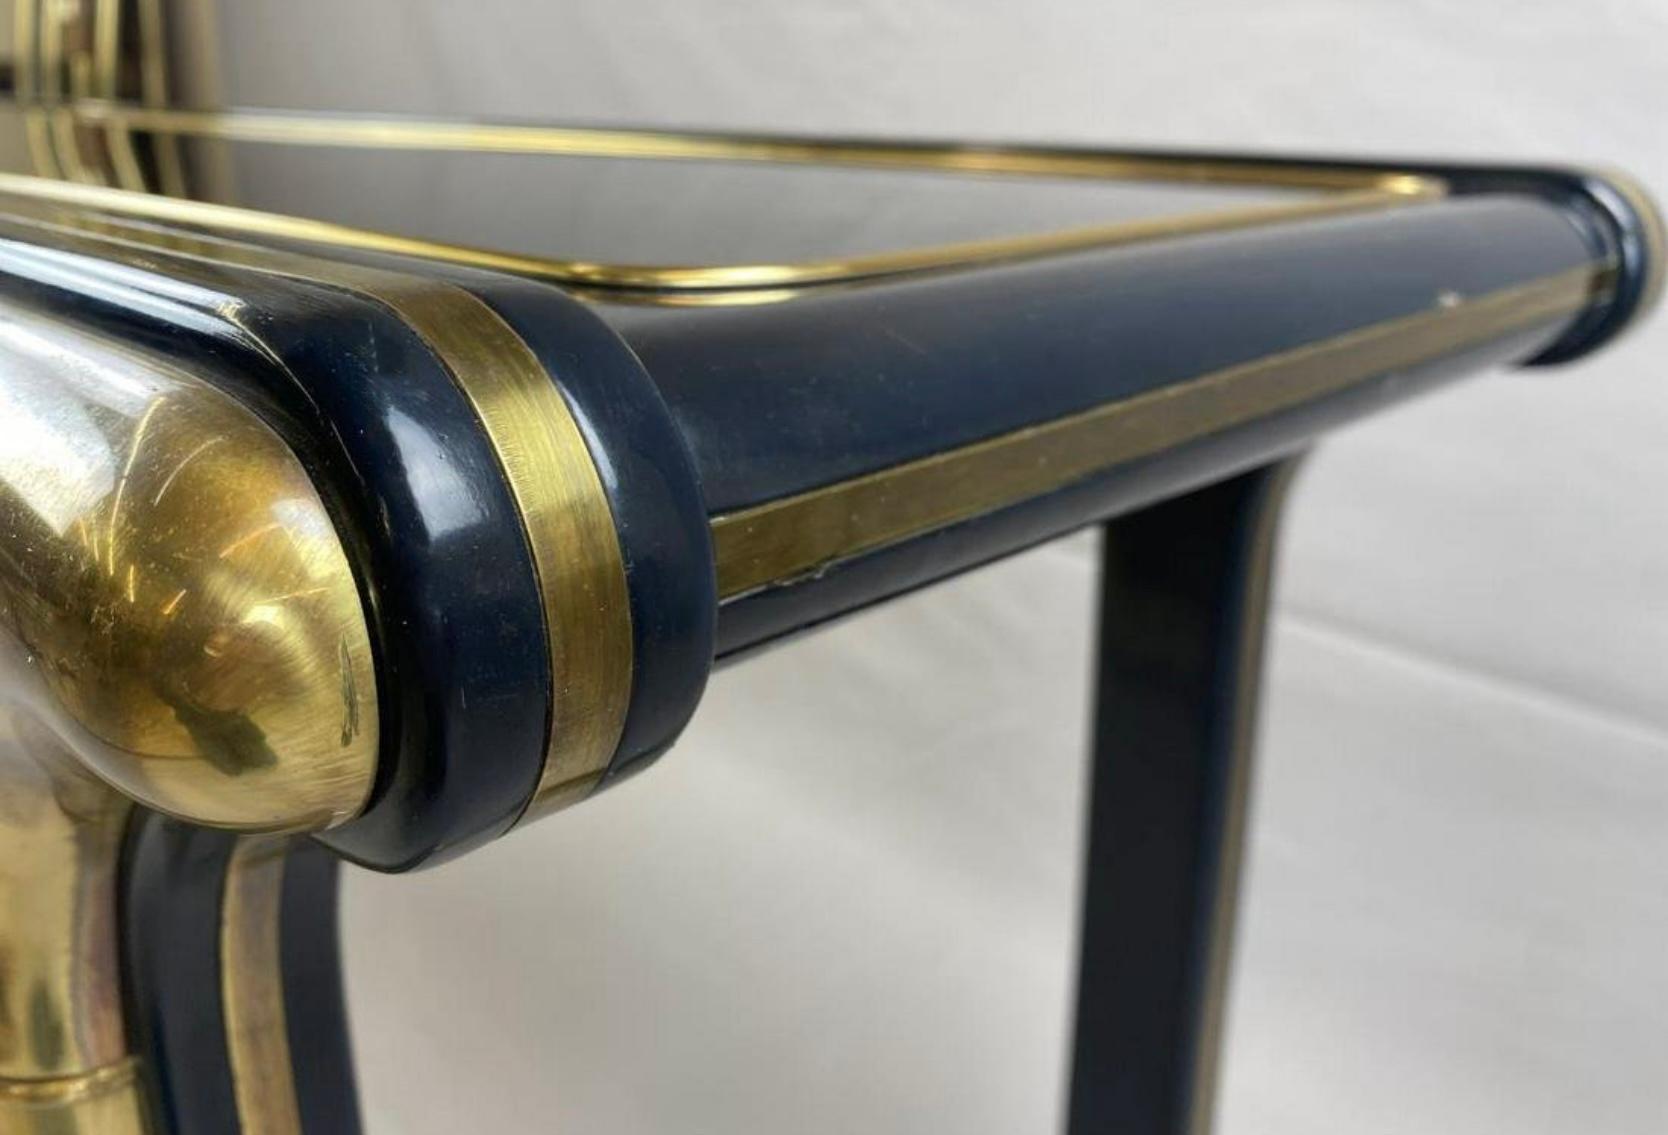 American Modern Brass And Lacquer Console Table By William Doezema For Mastercraft For Sale